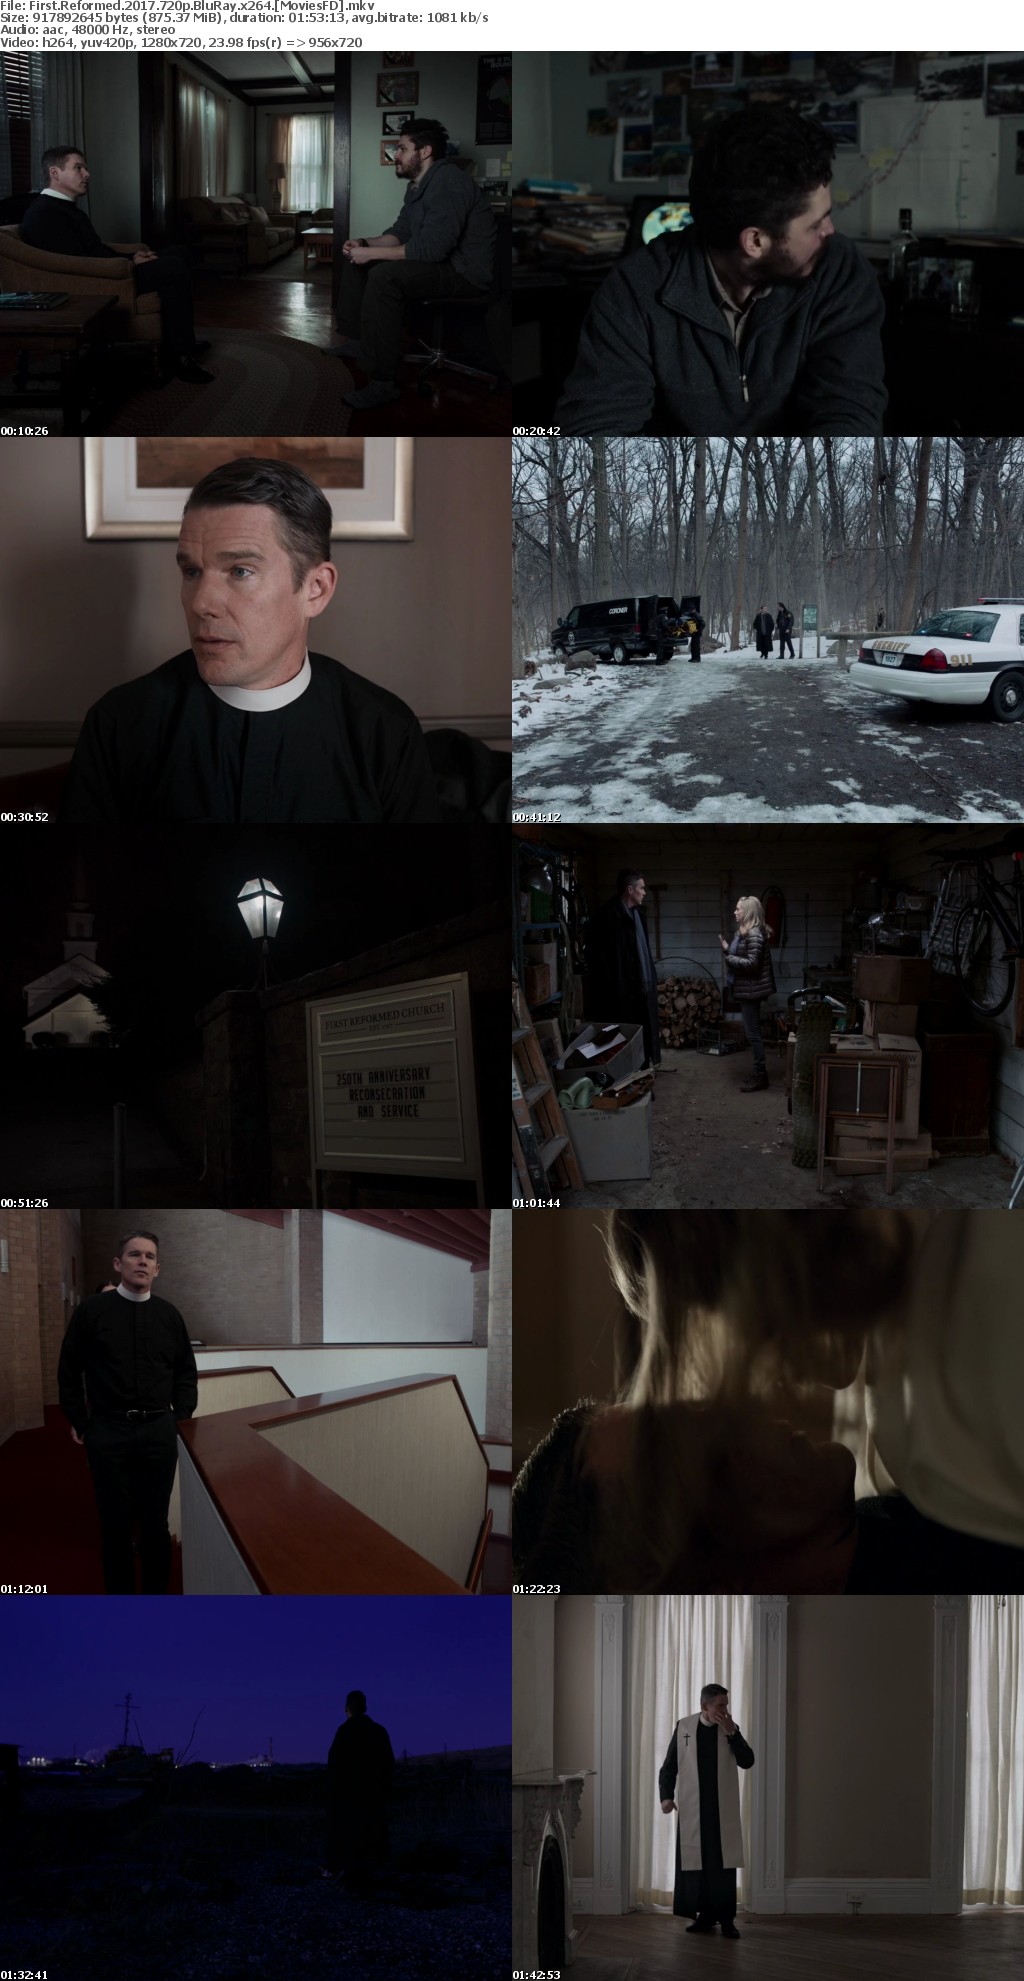 First Reformed 2017 720p BluRay x264 MoviesFD